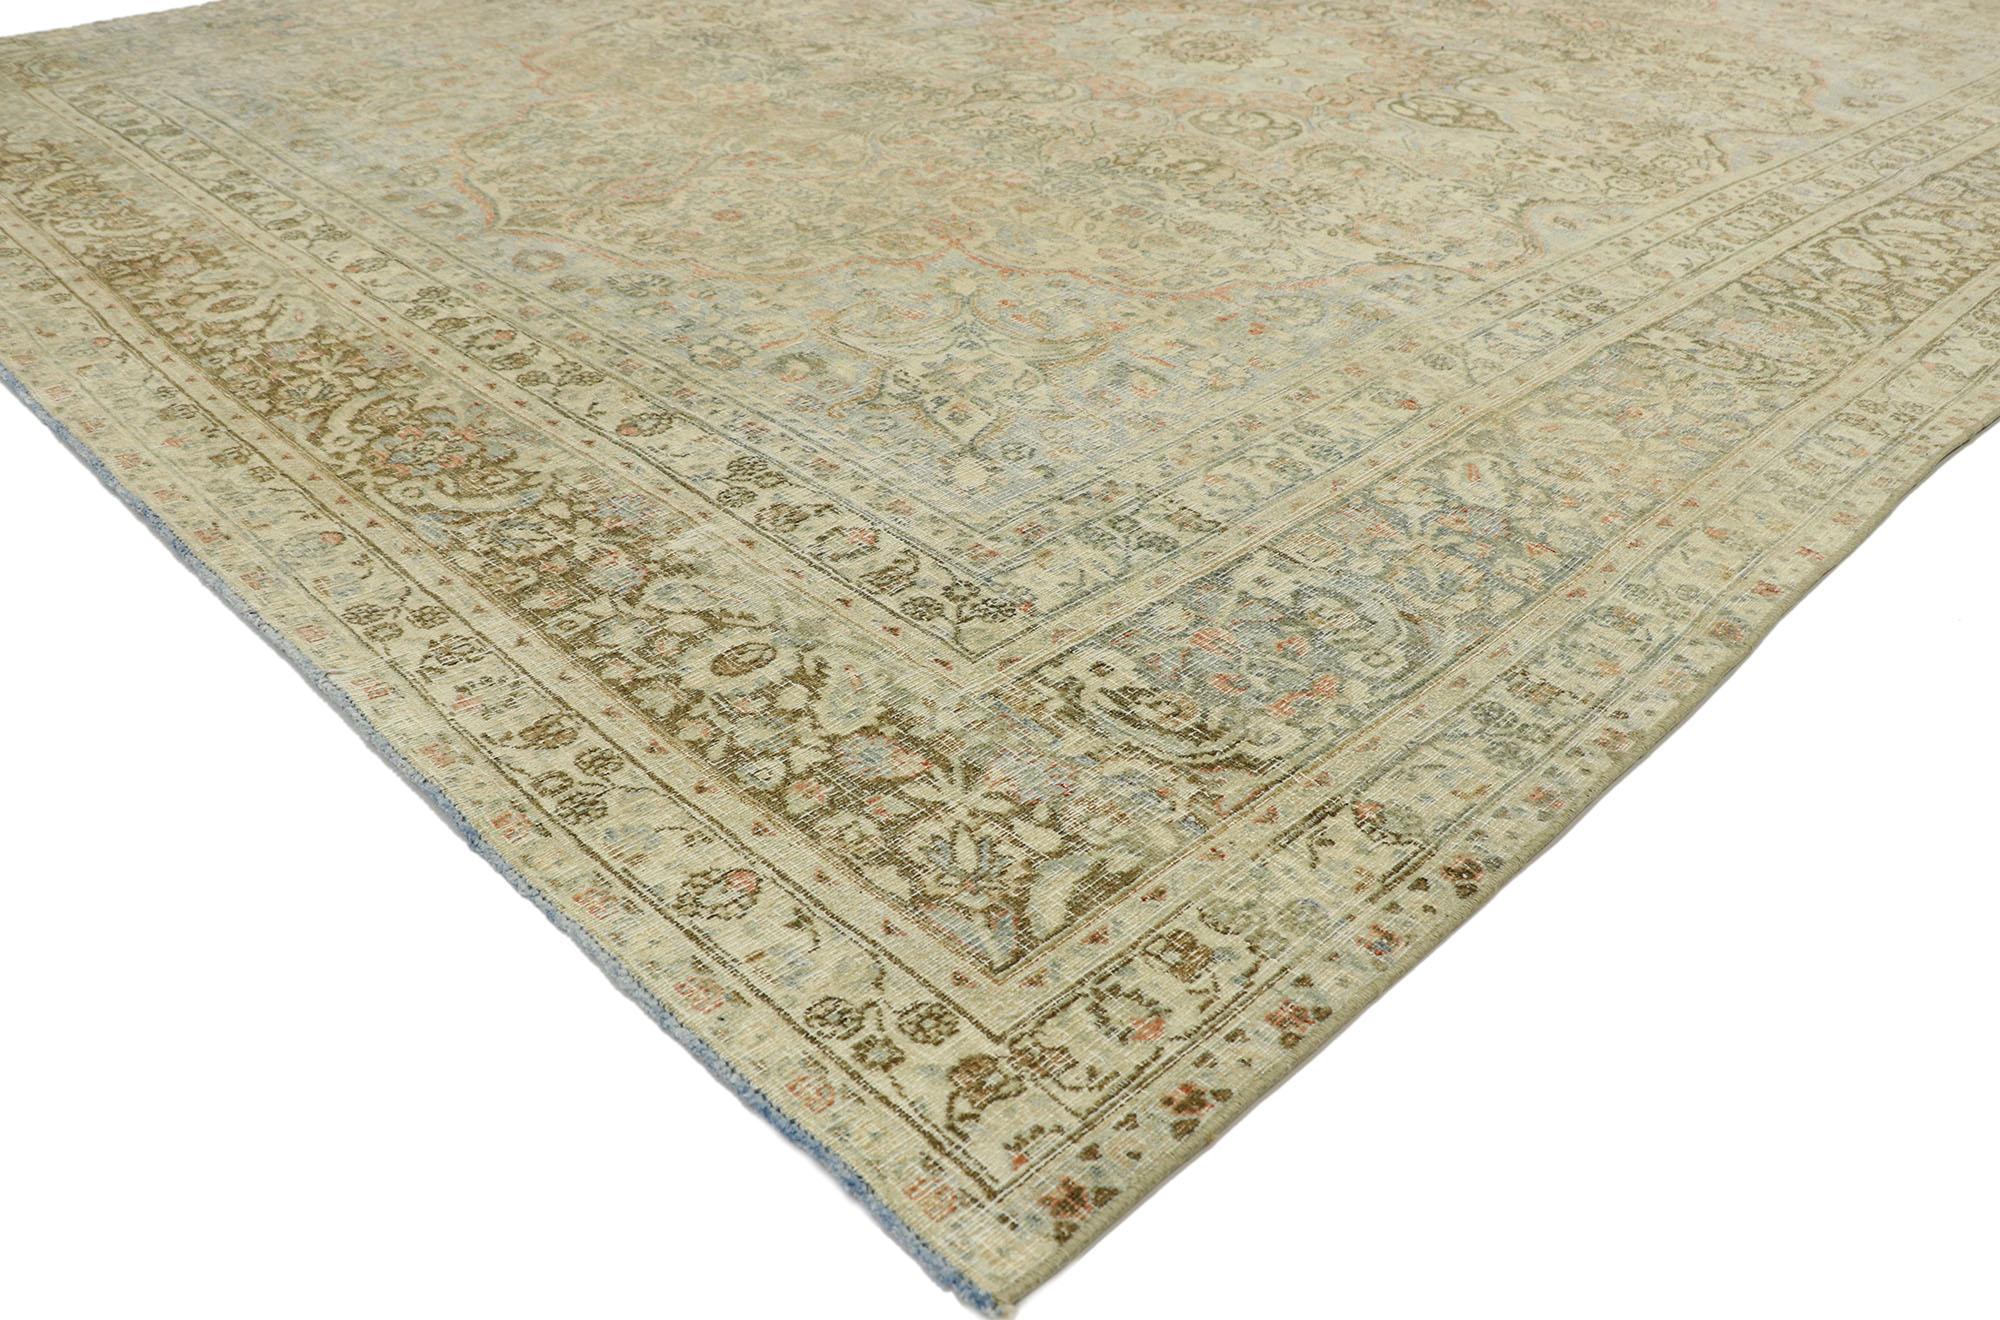 53219, distressed antique Persian Mashhad rug with modern rustic Cotswold cottage style. With a timeless botanical pattern and lovingly timeworn appearance, this hand knotted wool distressed antique Persian Mashhad rug charms with ease and